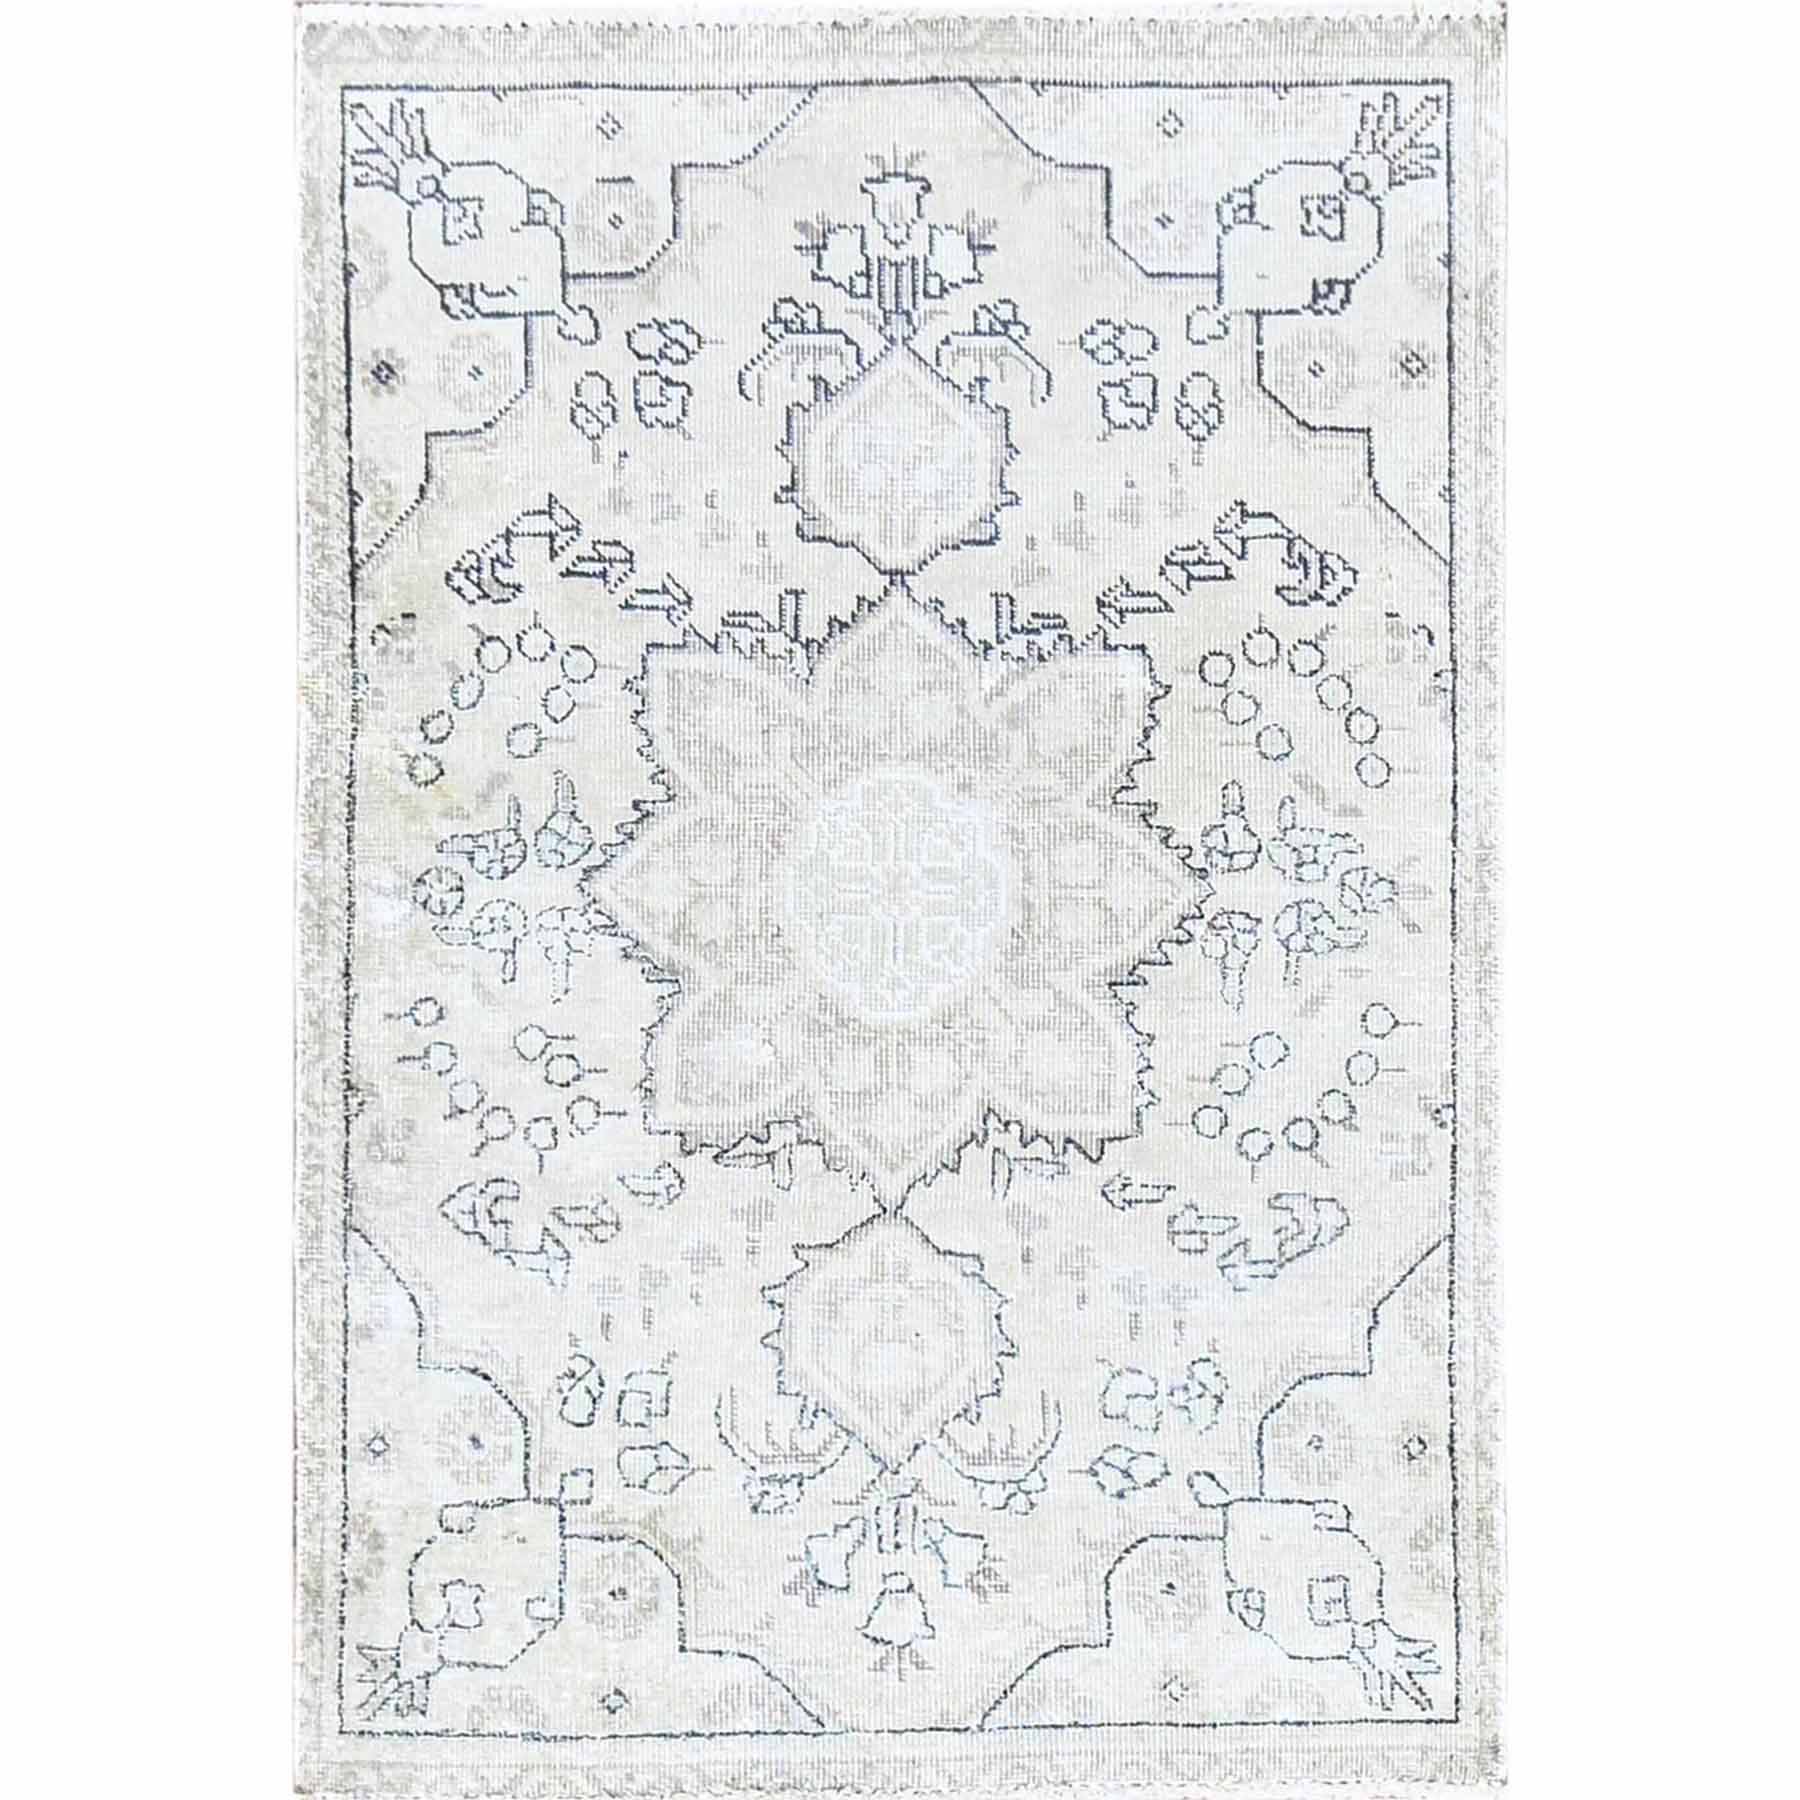 Overdyed-Vintage-Hand-Knotted-Rug-427765